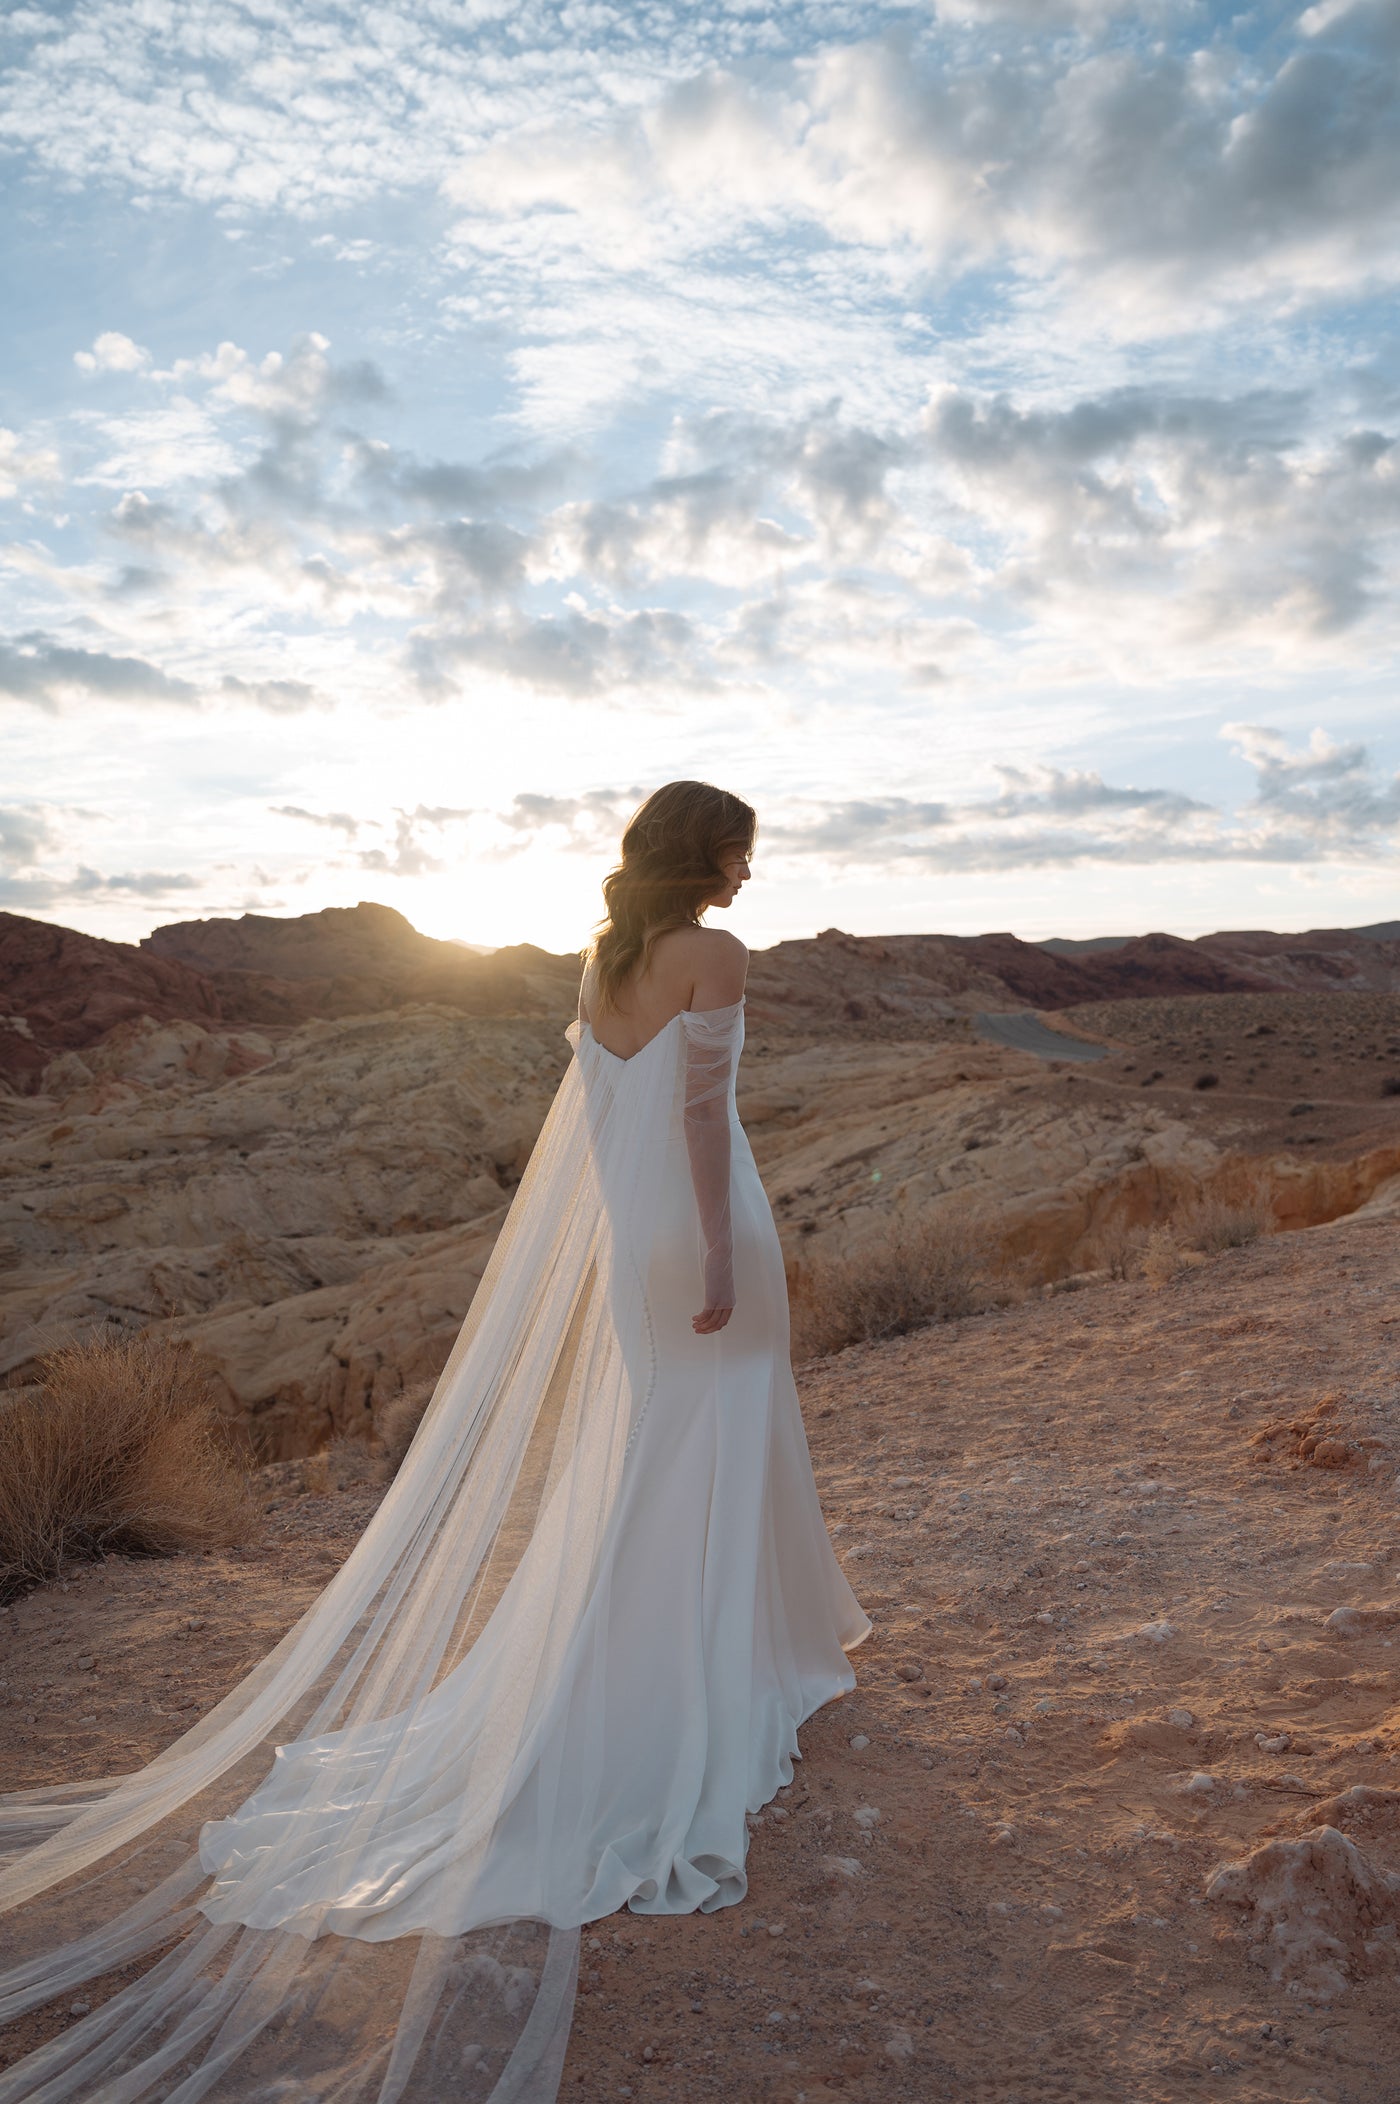 A bride in a Jenny Yoo Wedding Dress gown, featuring a fit and flare skirt and luxe satin fabric, stands contemplatively at a desert location at sunset.